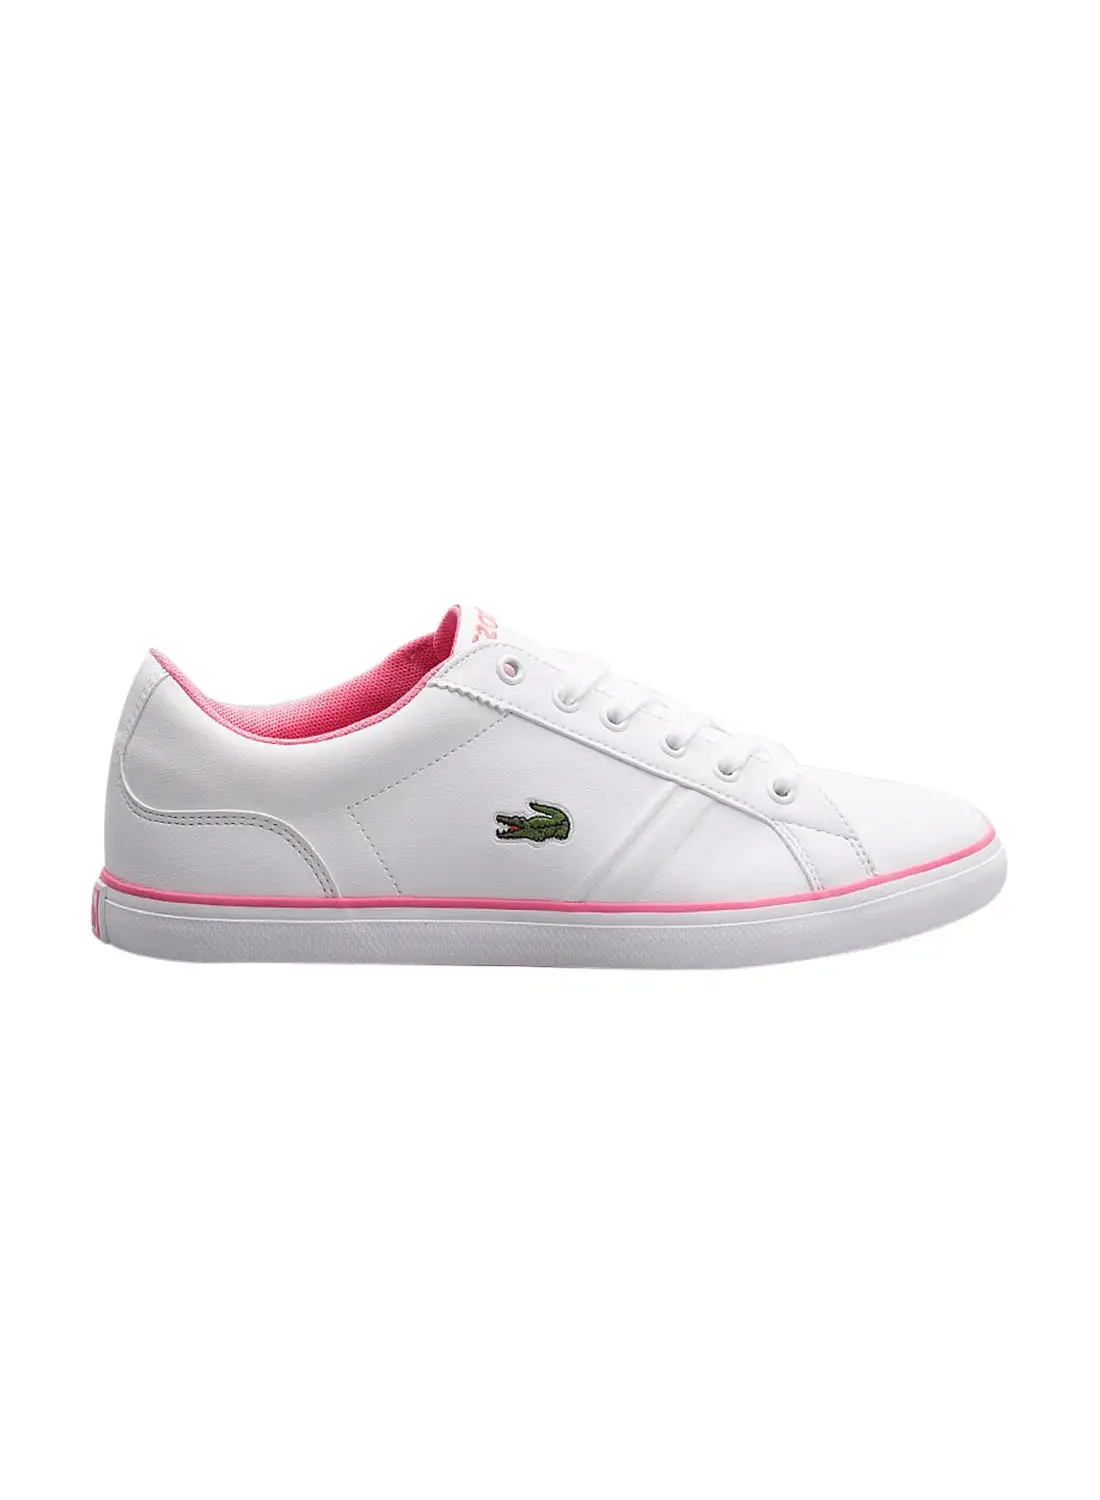 LACOSTE Lerond 218 2 Trainer Low Top Sneakers White/Pink